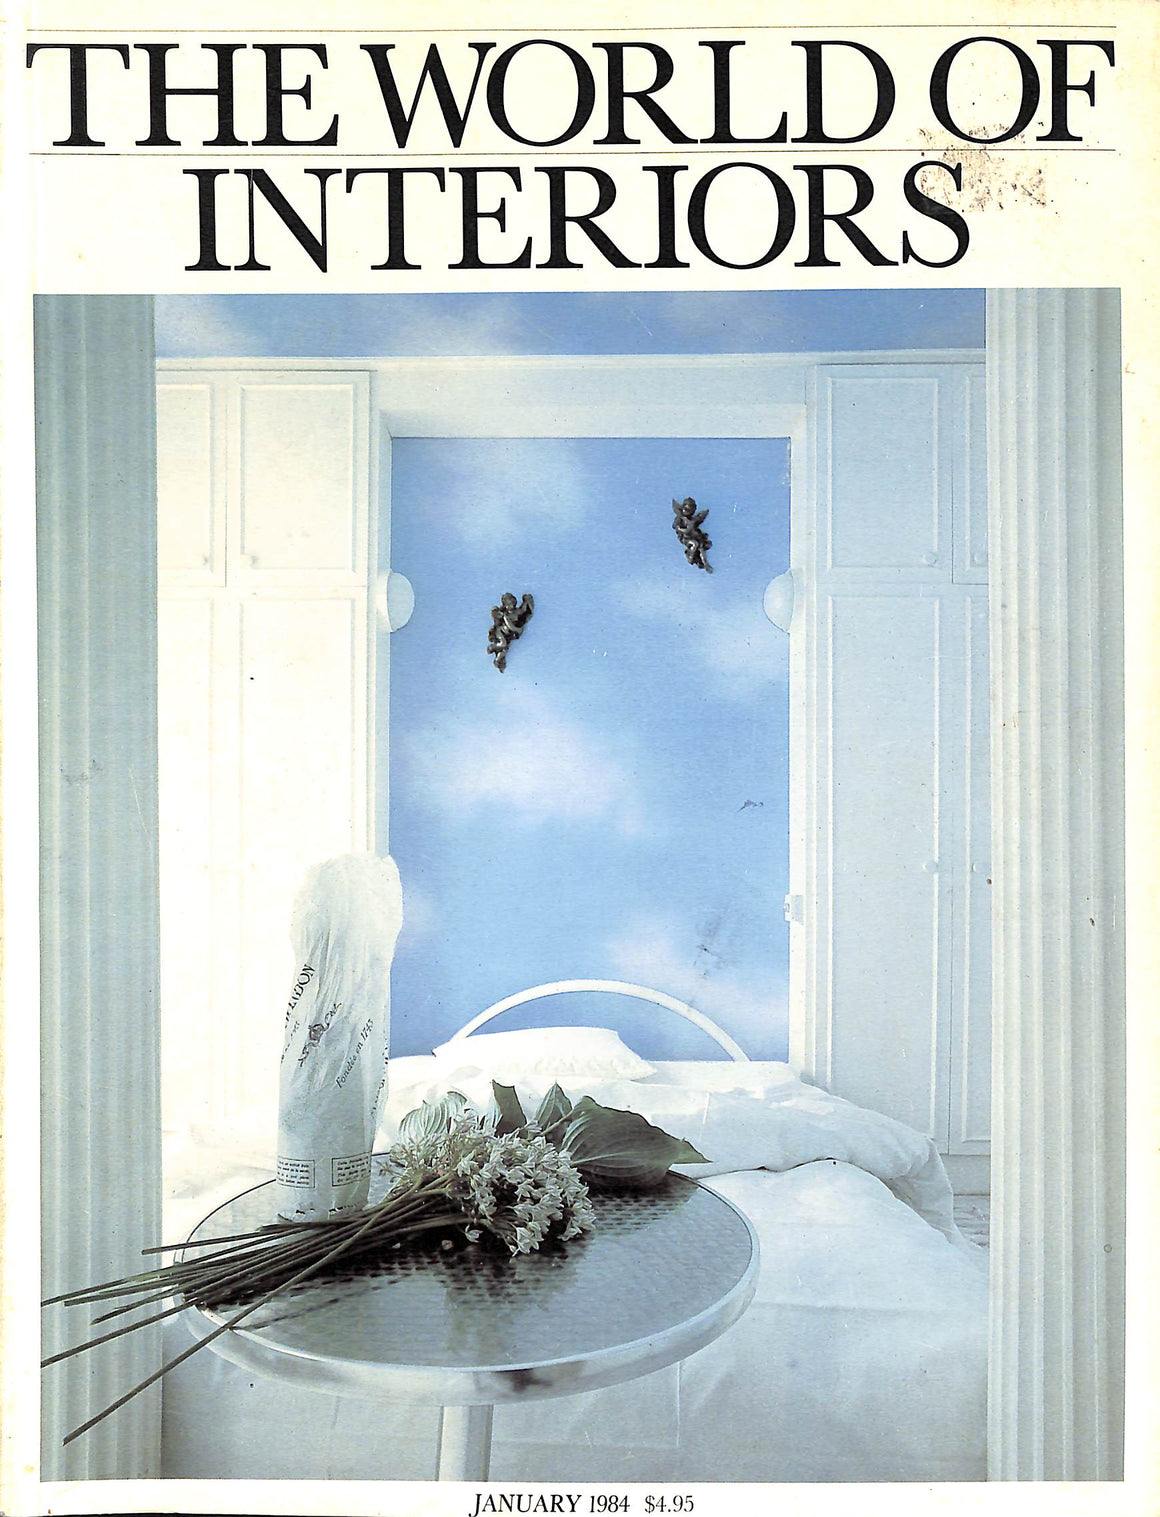 The World Of Interiors January 1984 (SOLD)